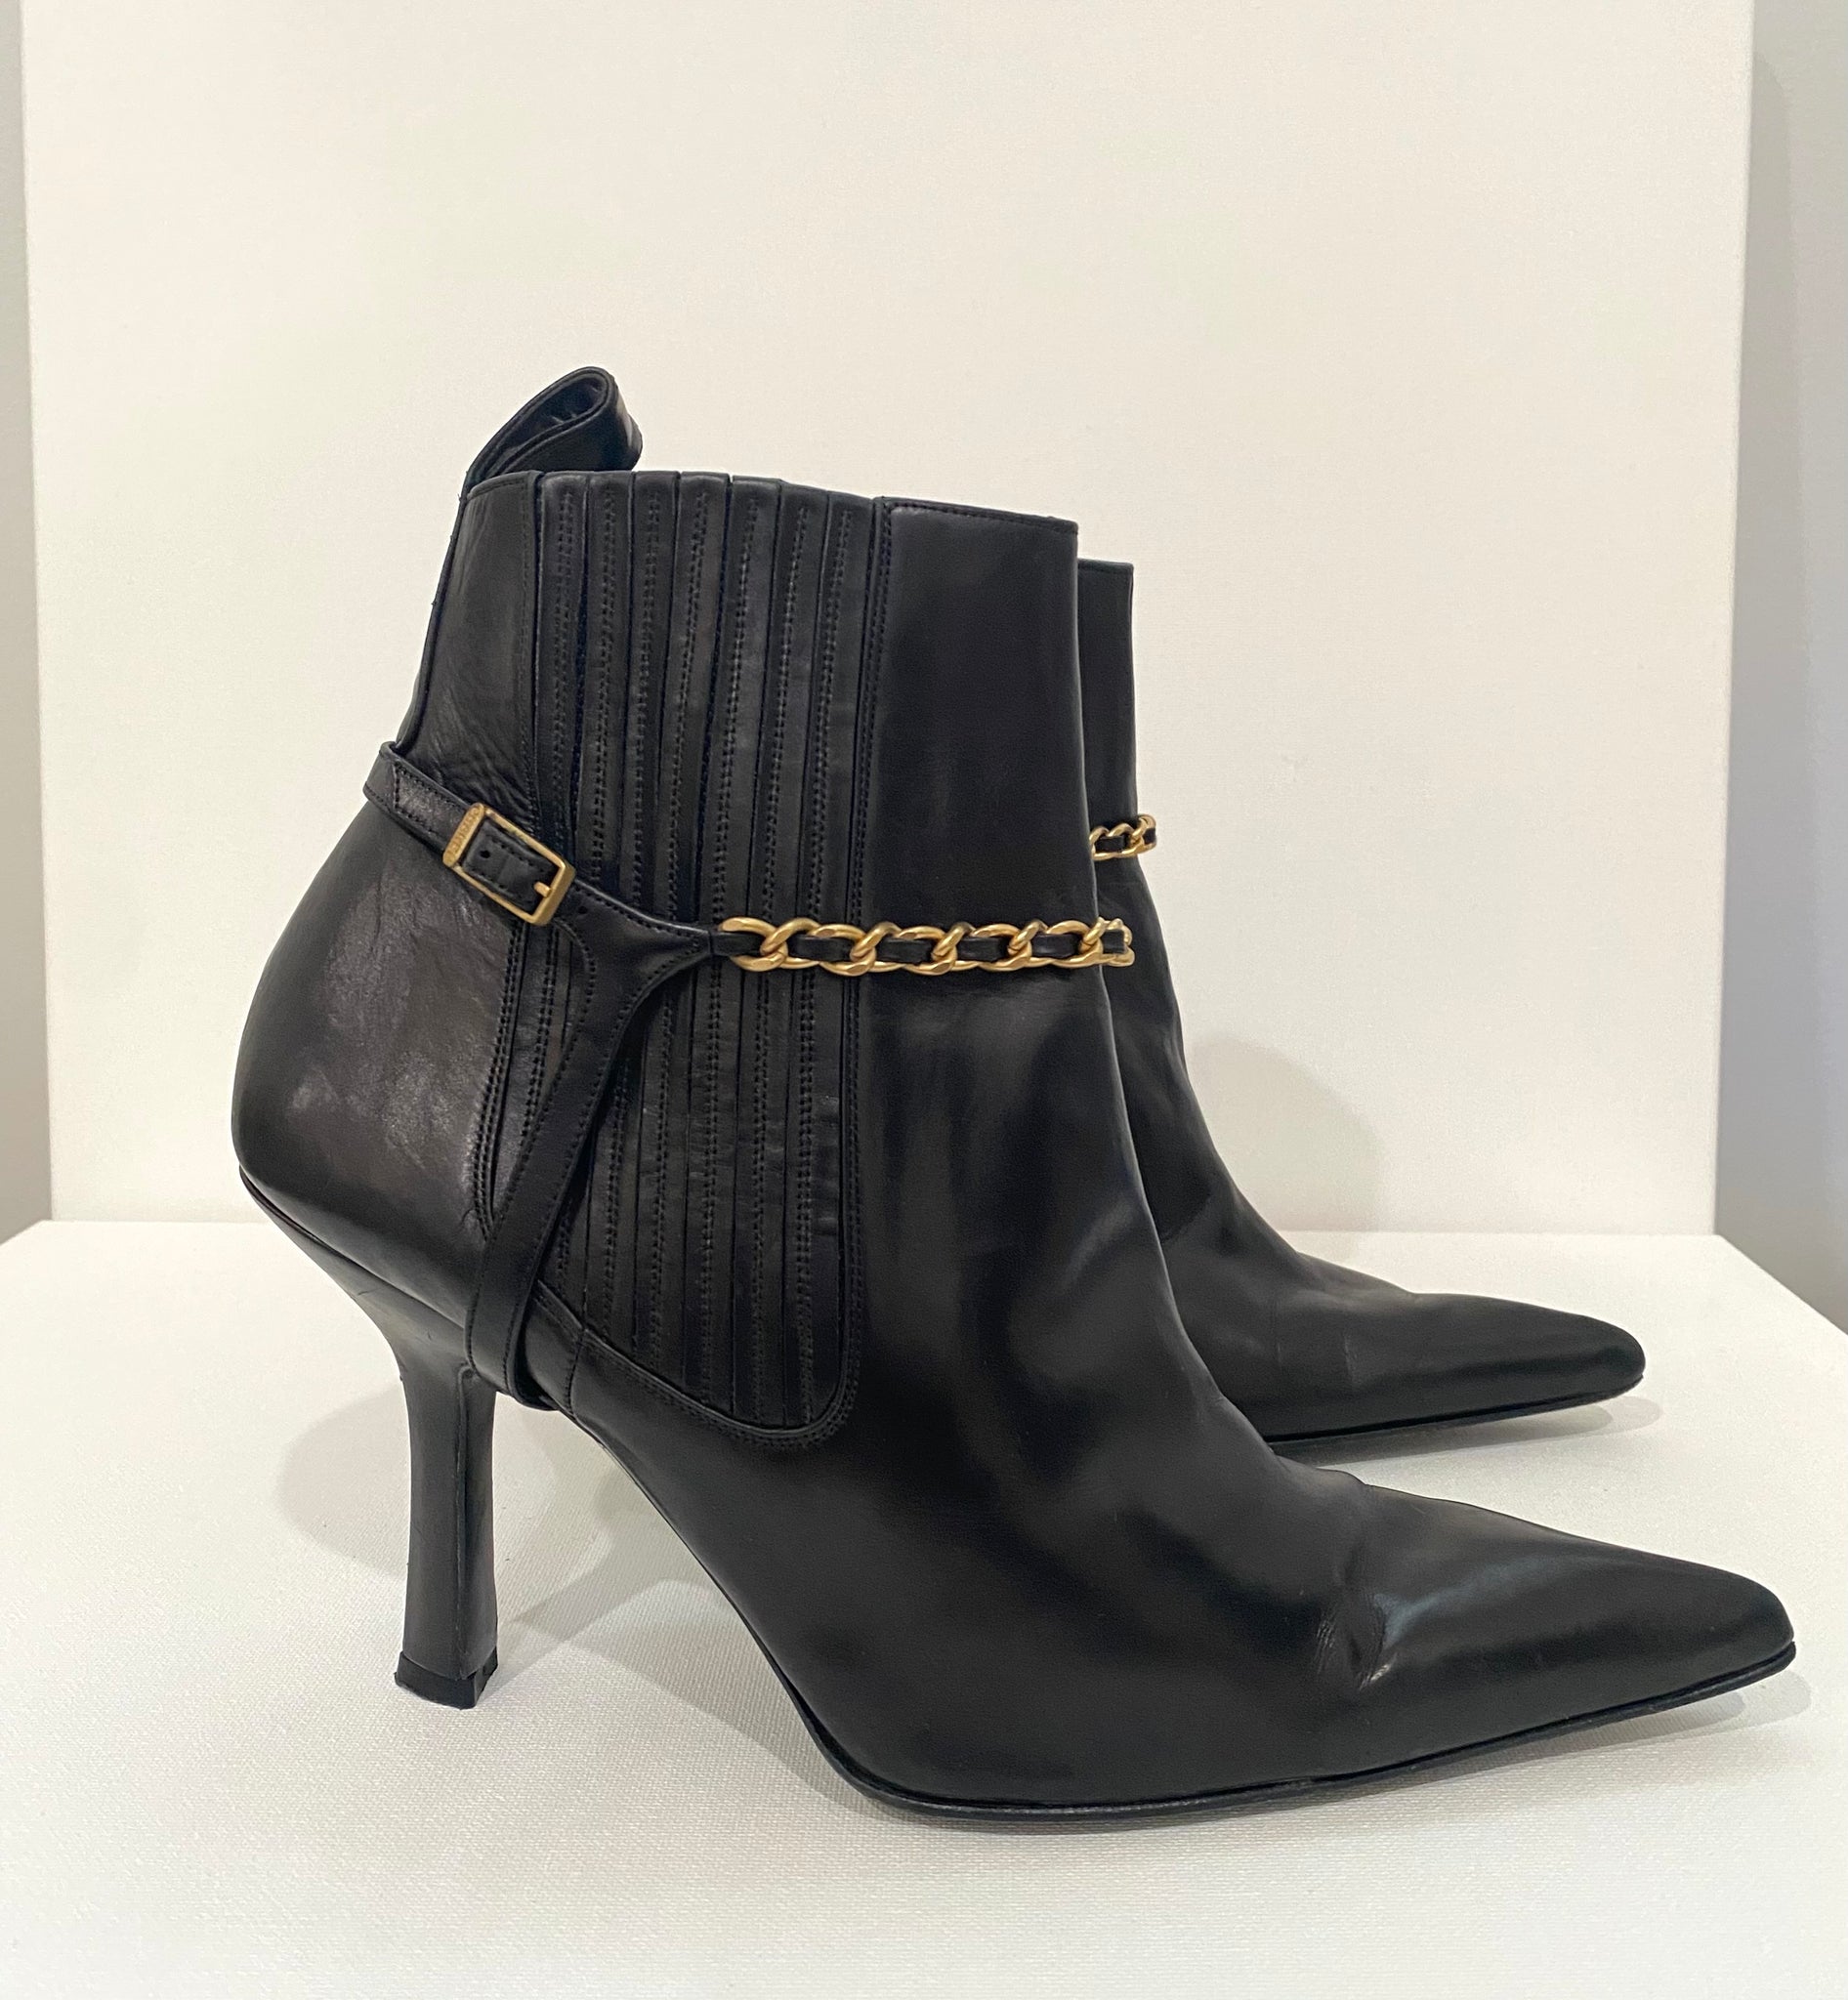 Chanel Boots 9 - 6 For Sale on 1stDibs  what are chanel 9 boots, chanel  nine boots price, chanel no 9 boots